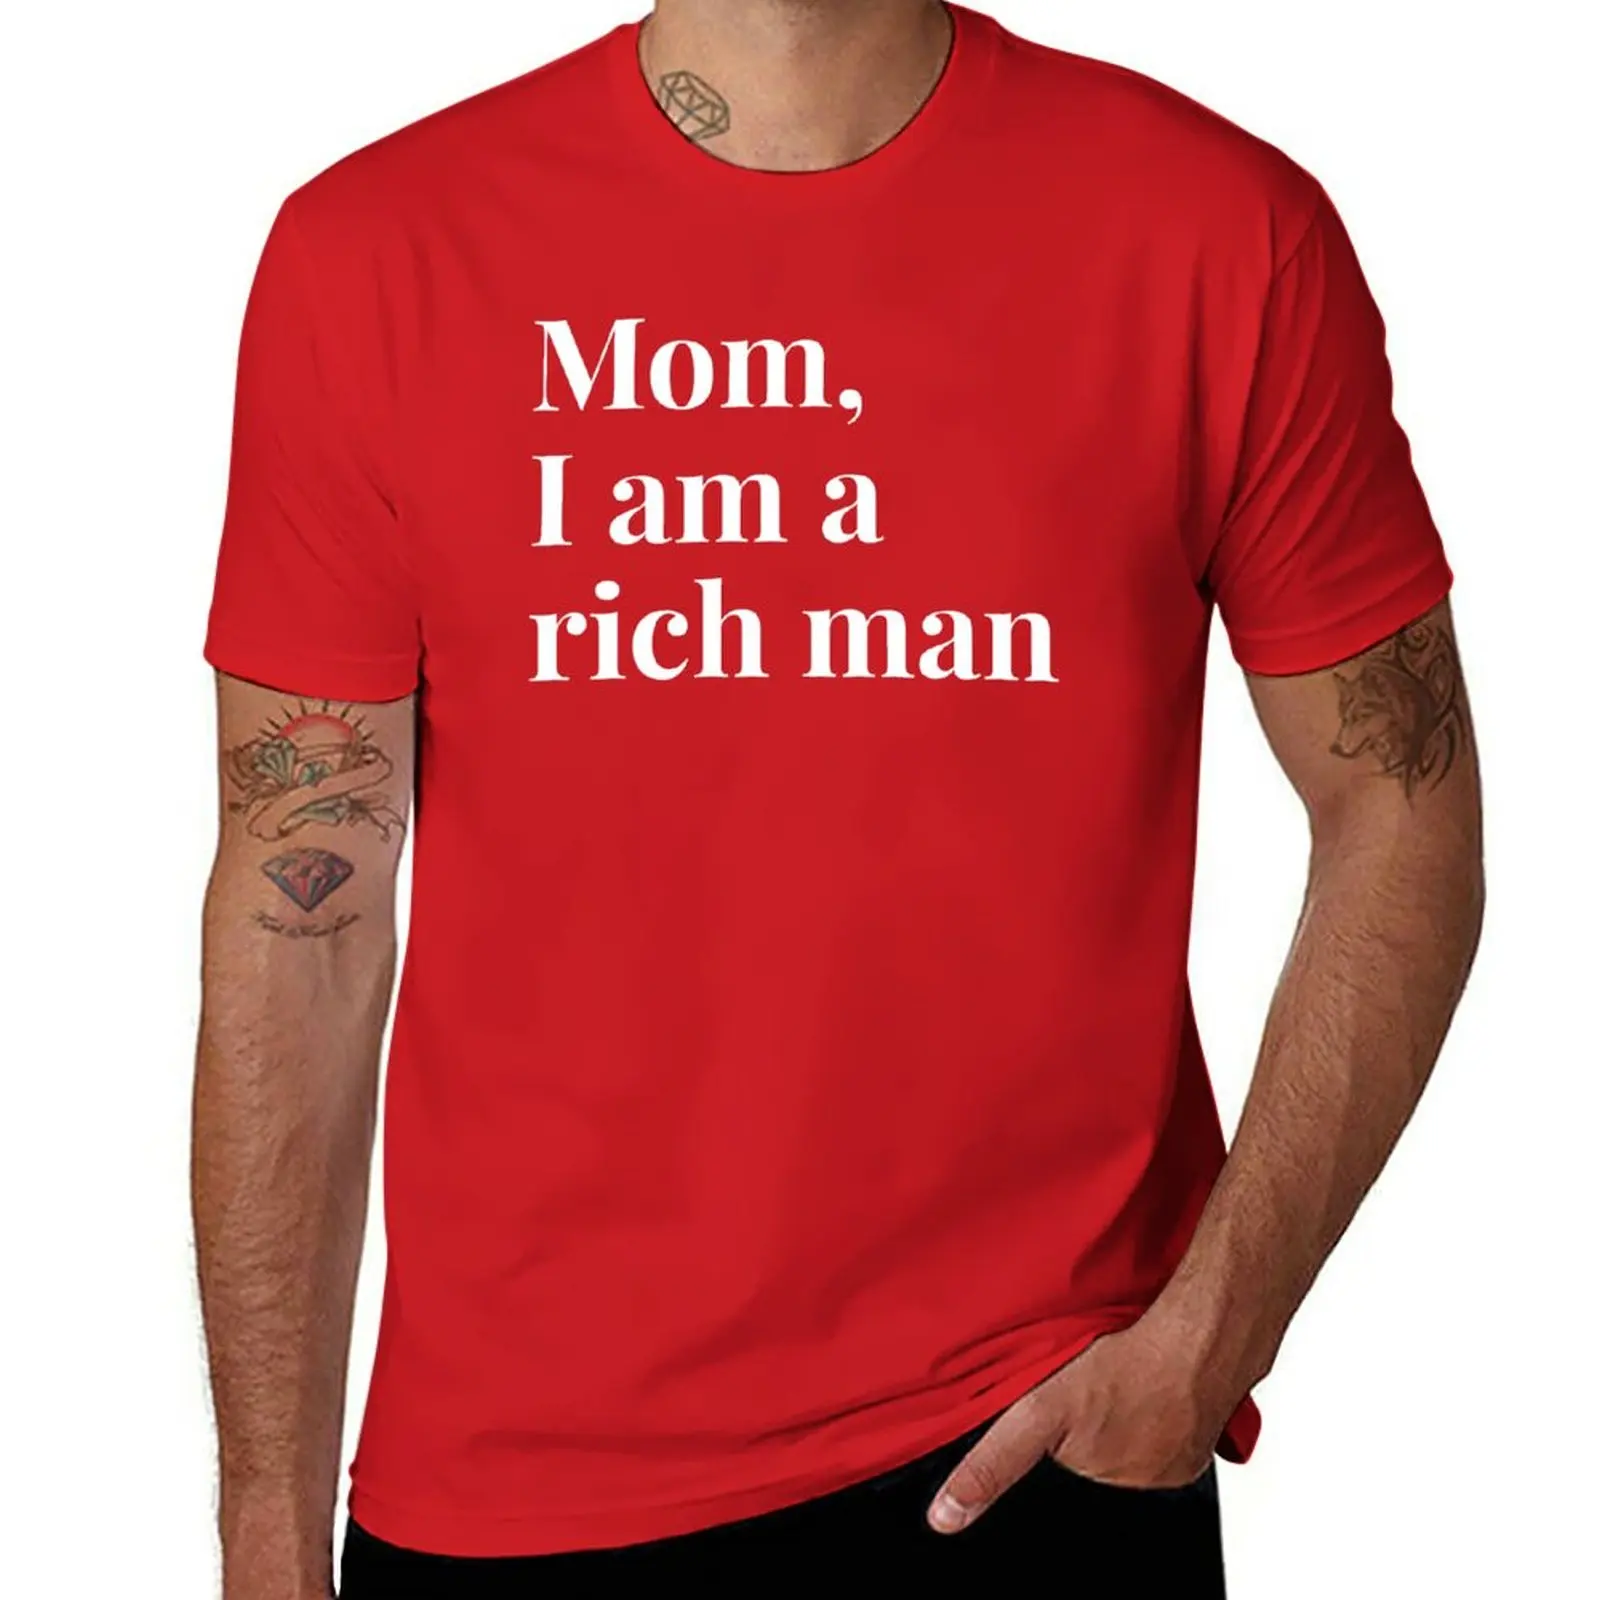 

New Mom I am a rich man, funny T-Shirt aesthetic clothes Short sleeve tee sweat shirt t shirts for men cotton